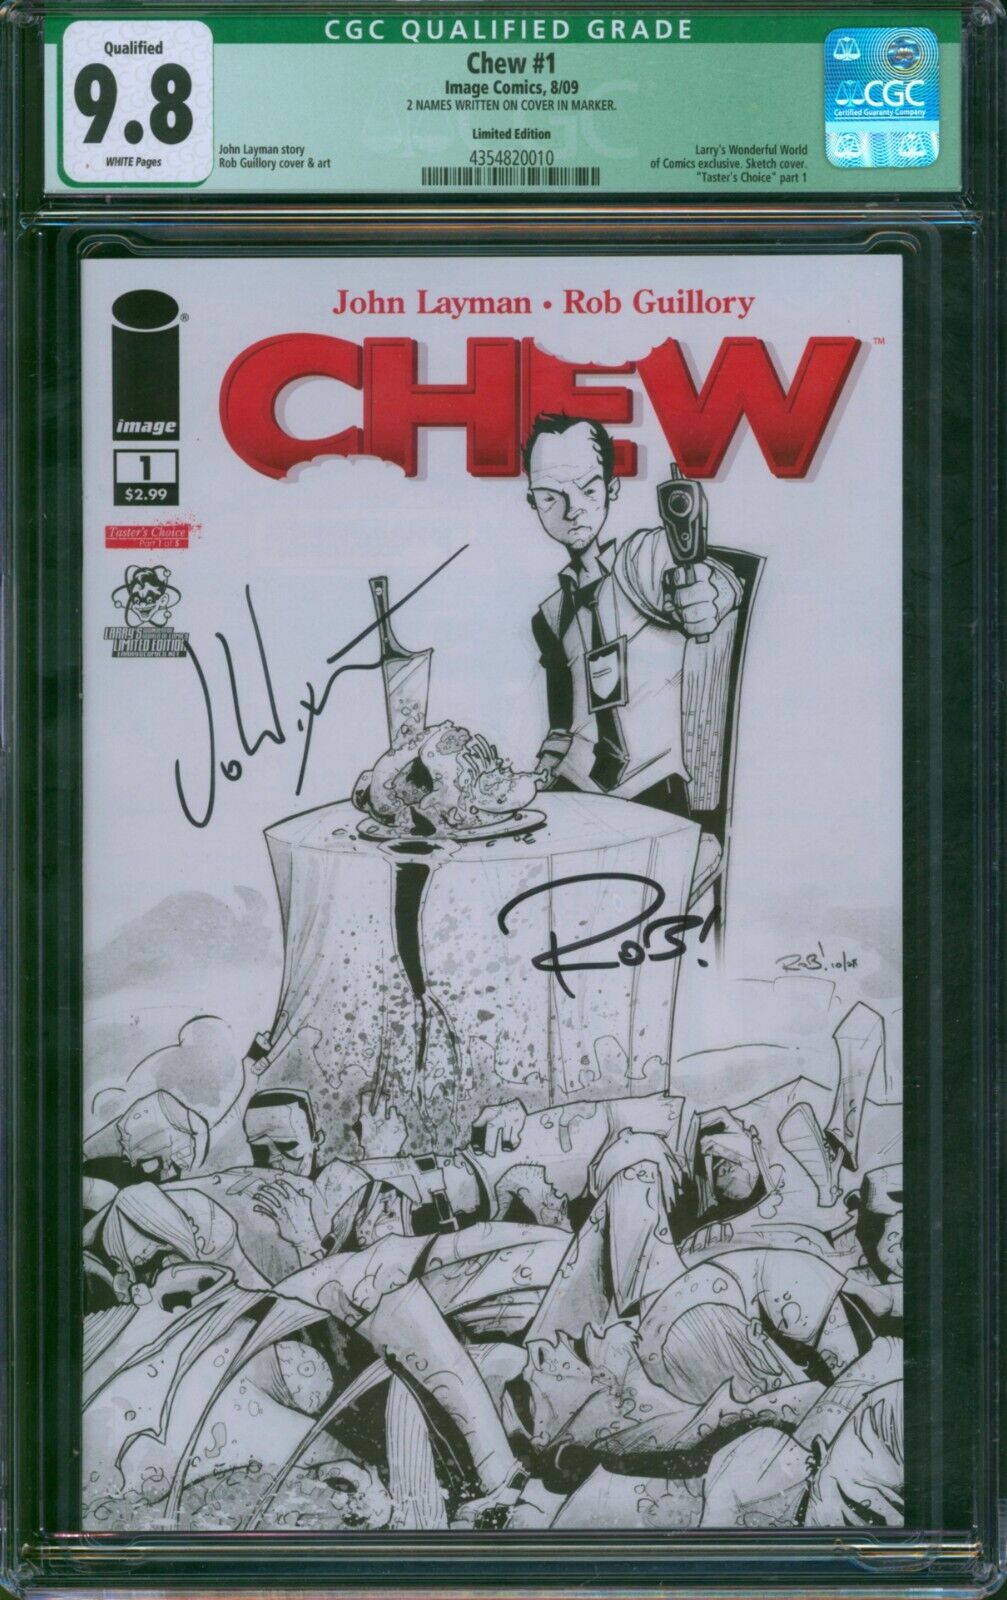 Chew #1 Larry's Limited Edition ⭐ CGC 9.8 Qualified Signed ⭐ Variant Image 2009